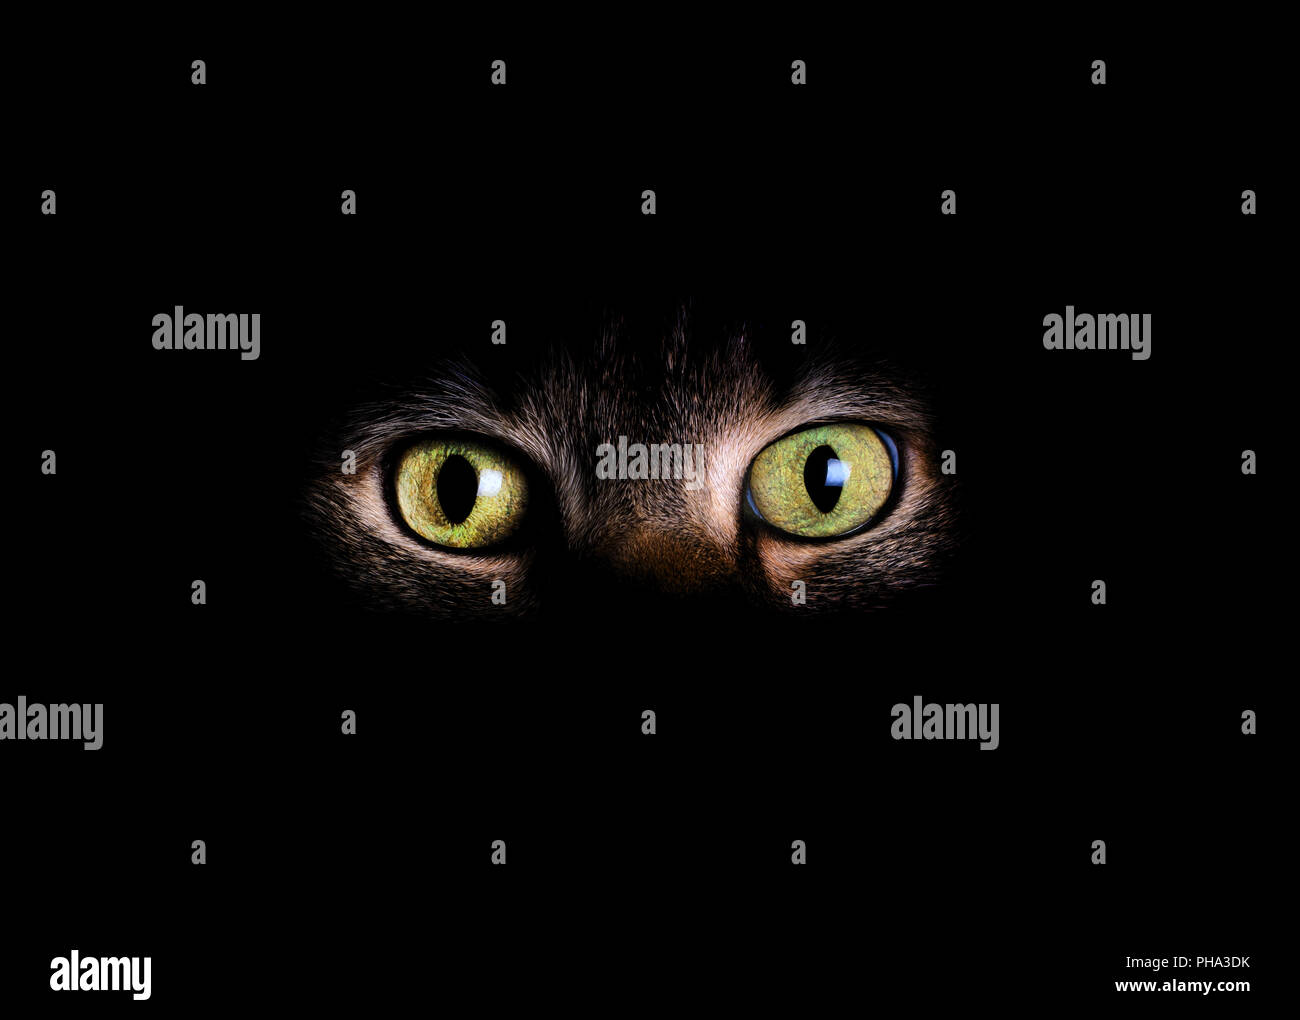 Animal eyes and face in dark background Stock Photo